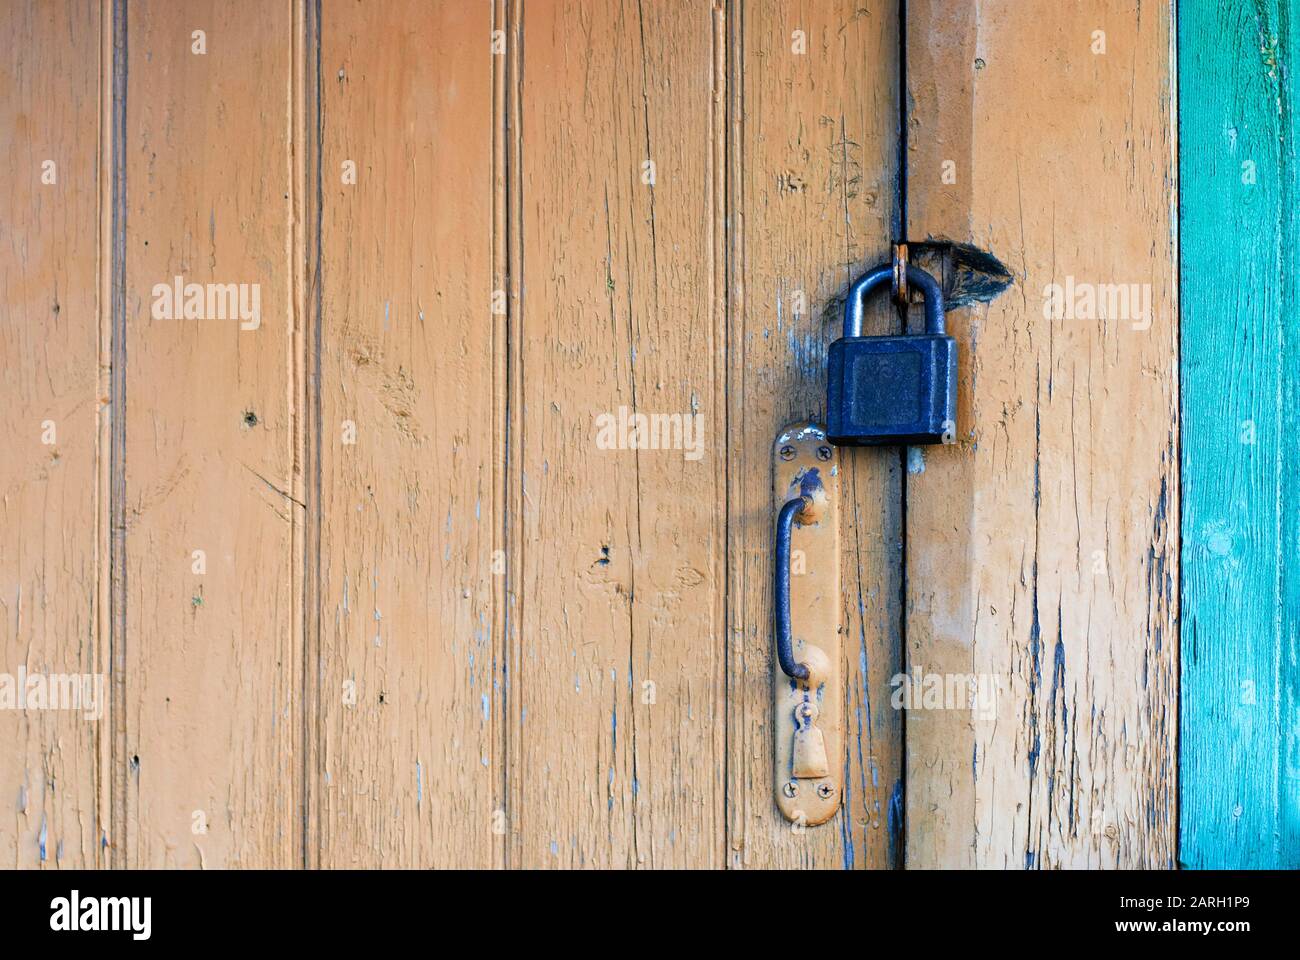 Old closed door with padlock and knob Stock Photo